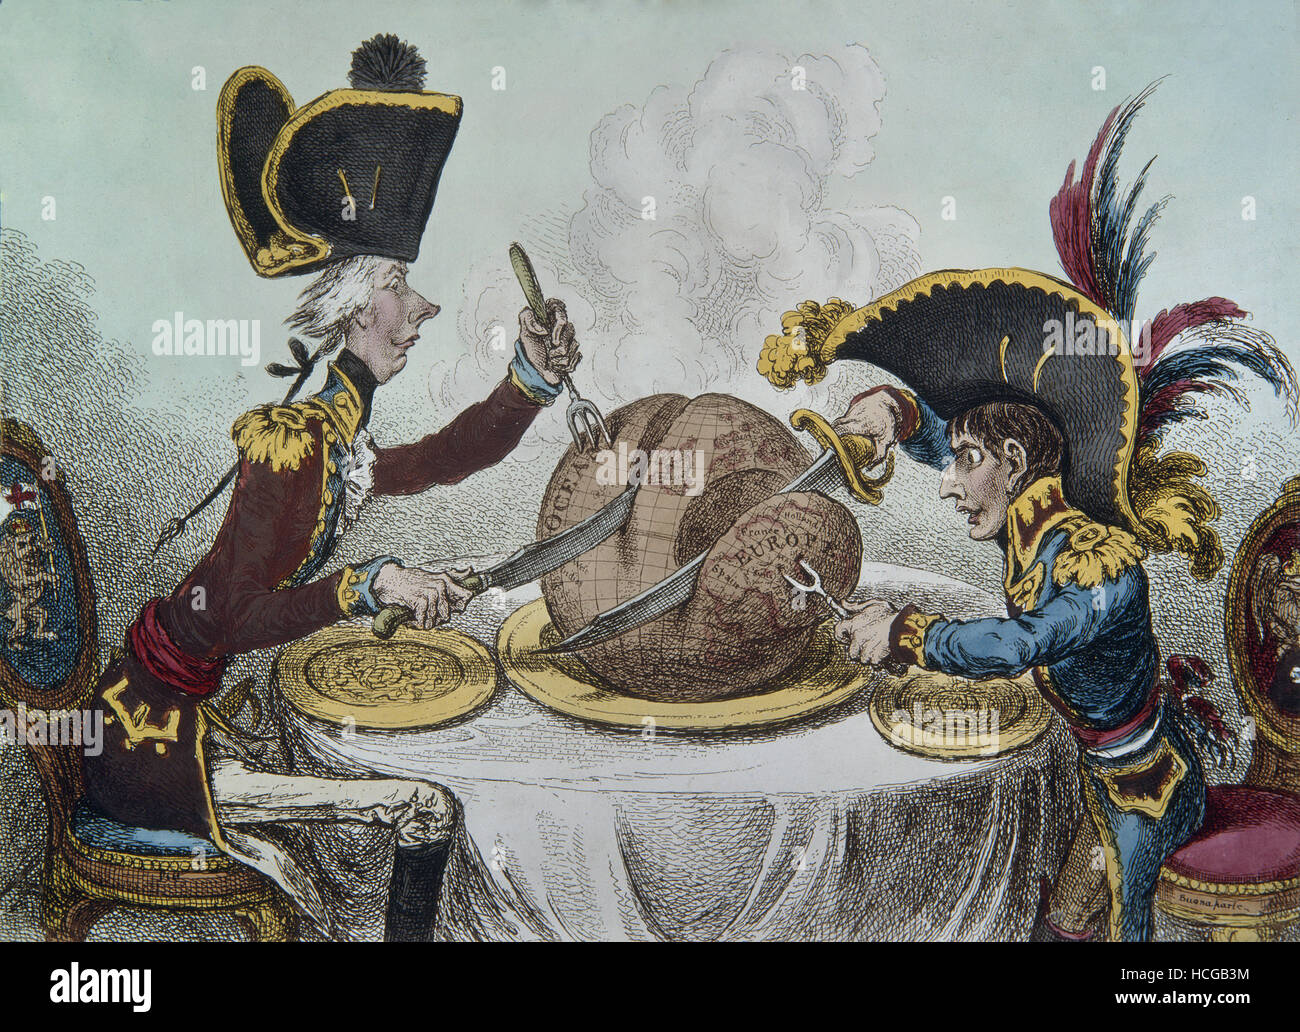 James Gillray - The Plumb-Pudding in Danger – or – State Epicures Taking un Petit Souper - 1805 Stock Photo